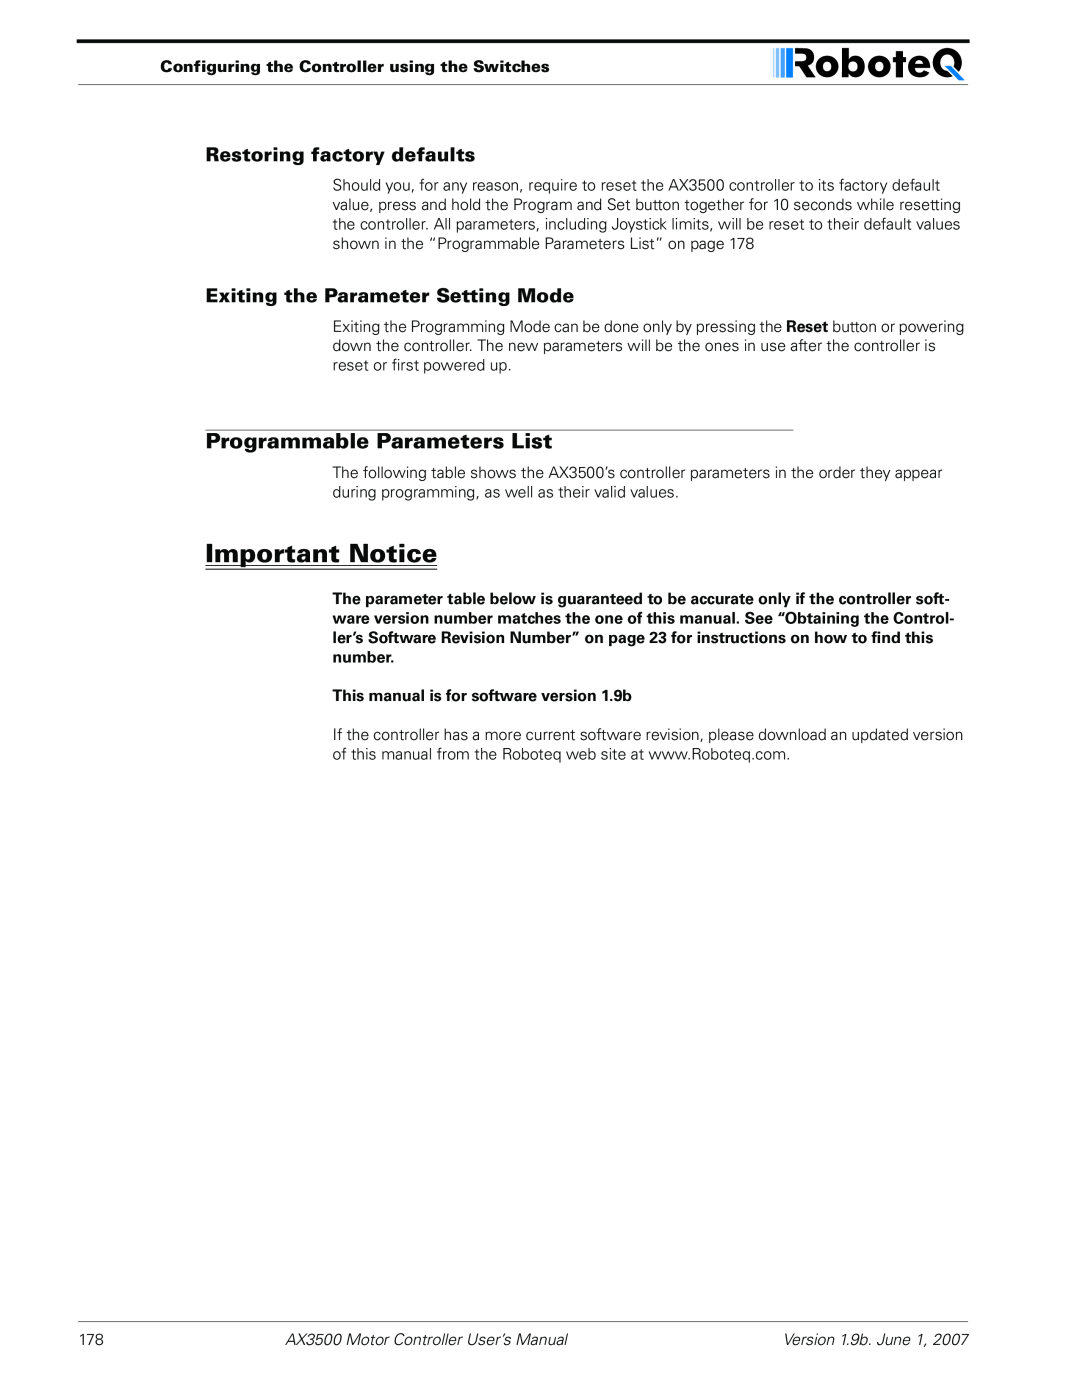 RoboteQ AX3500 user manual Programmable Parameters List, Restoring factory defaults, Exiting the Parameter Setting Mode 